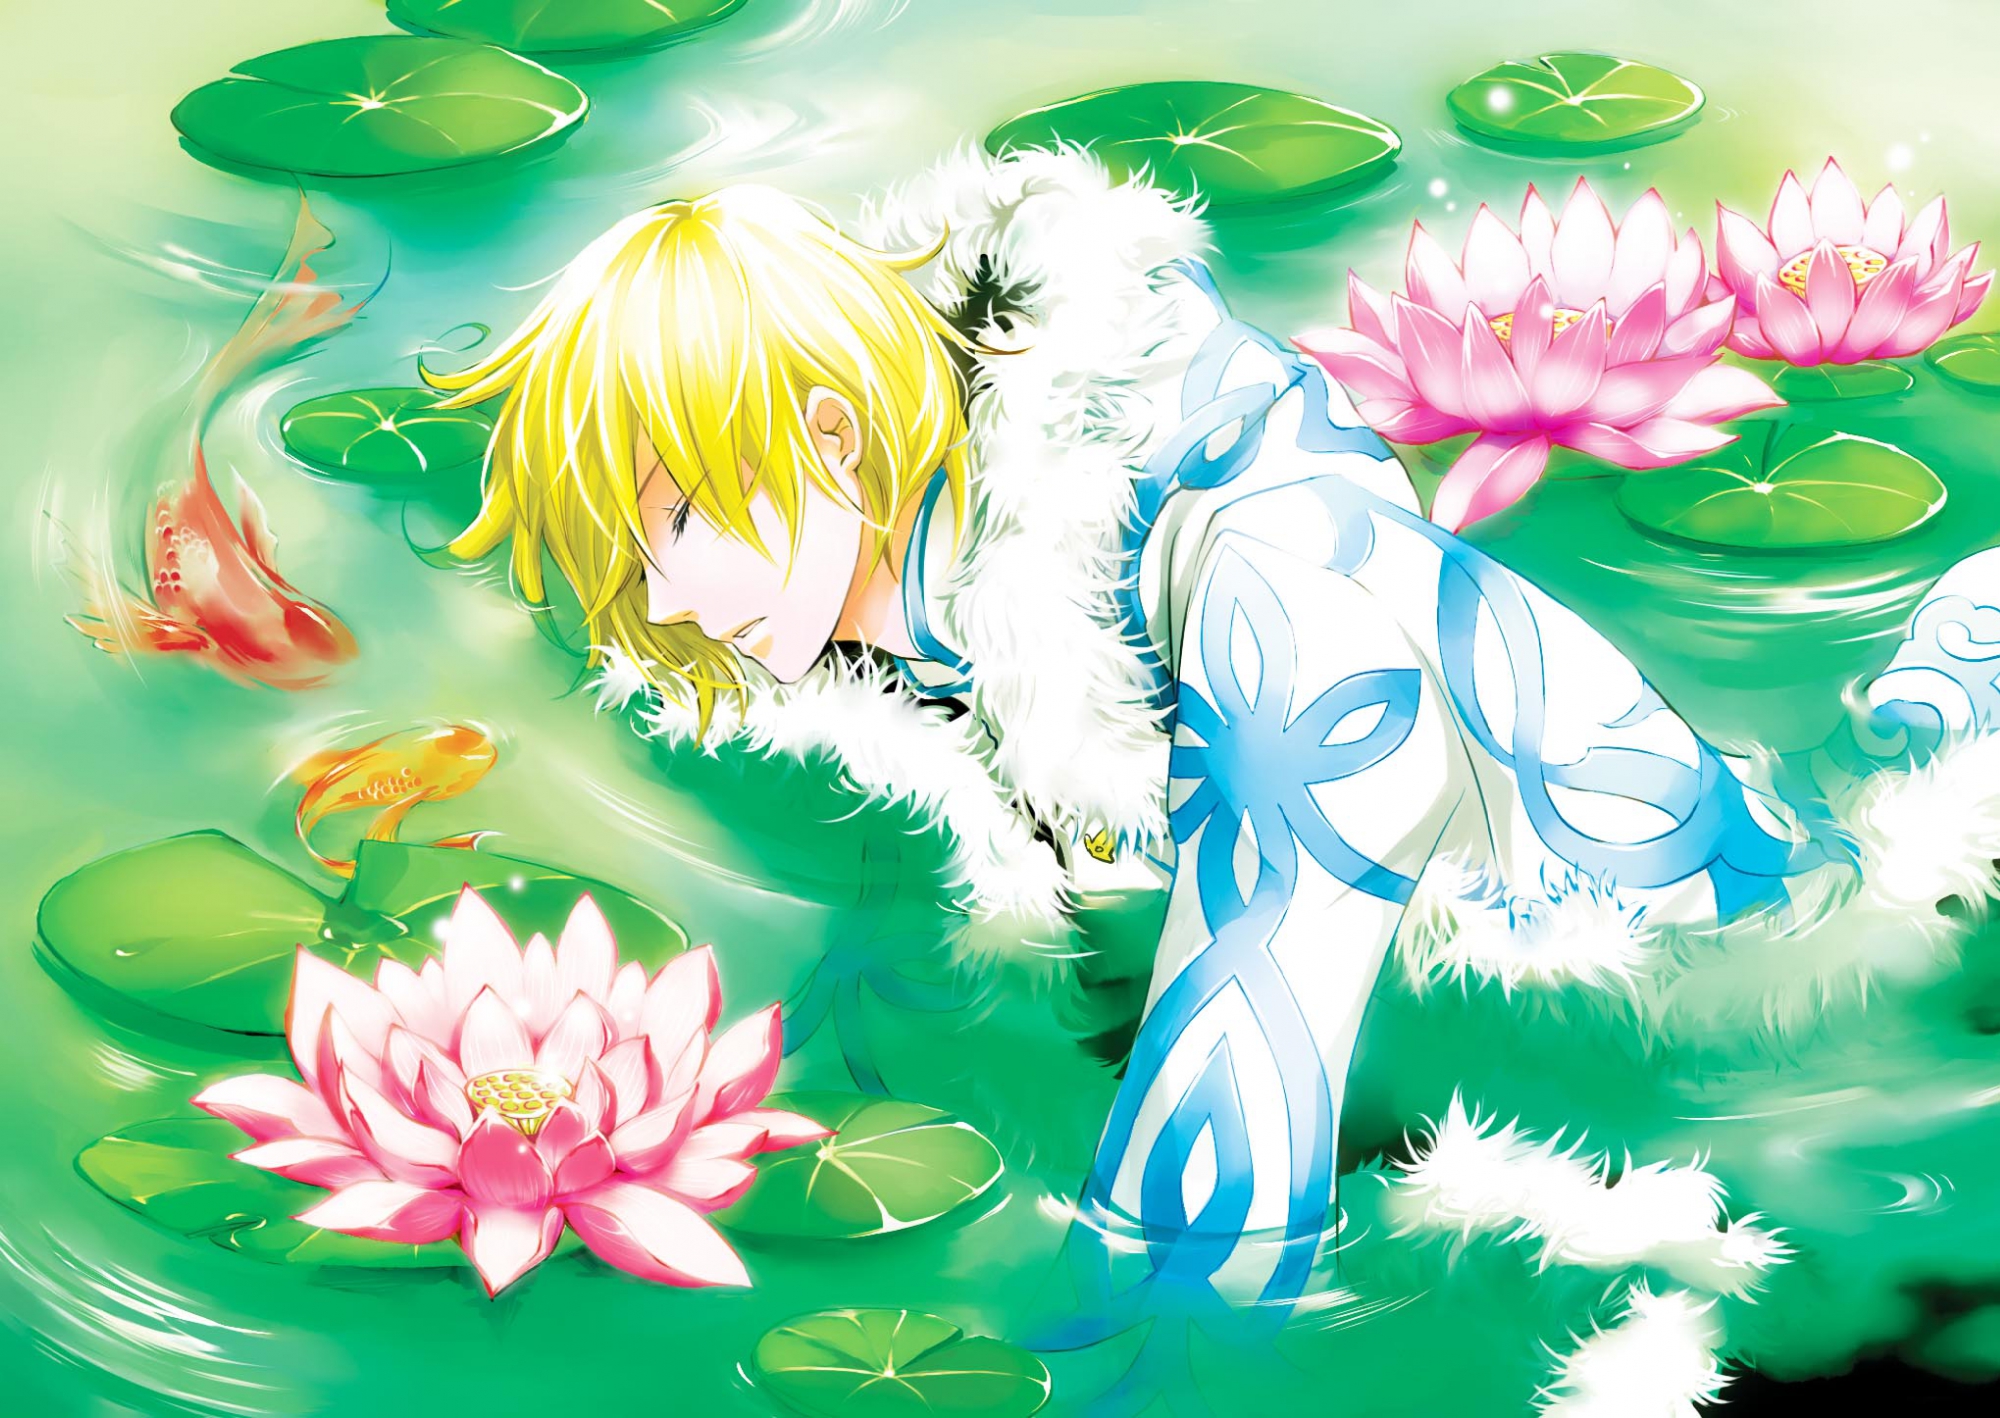 A mystical Anime-inspired wallpaper featuring Fay, from Tsubasa: Reservoir Chronicle. Perfect for fans!